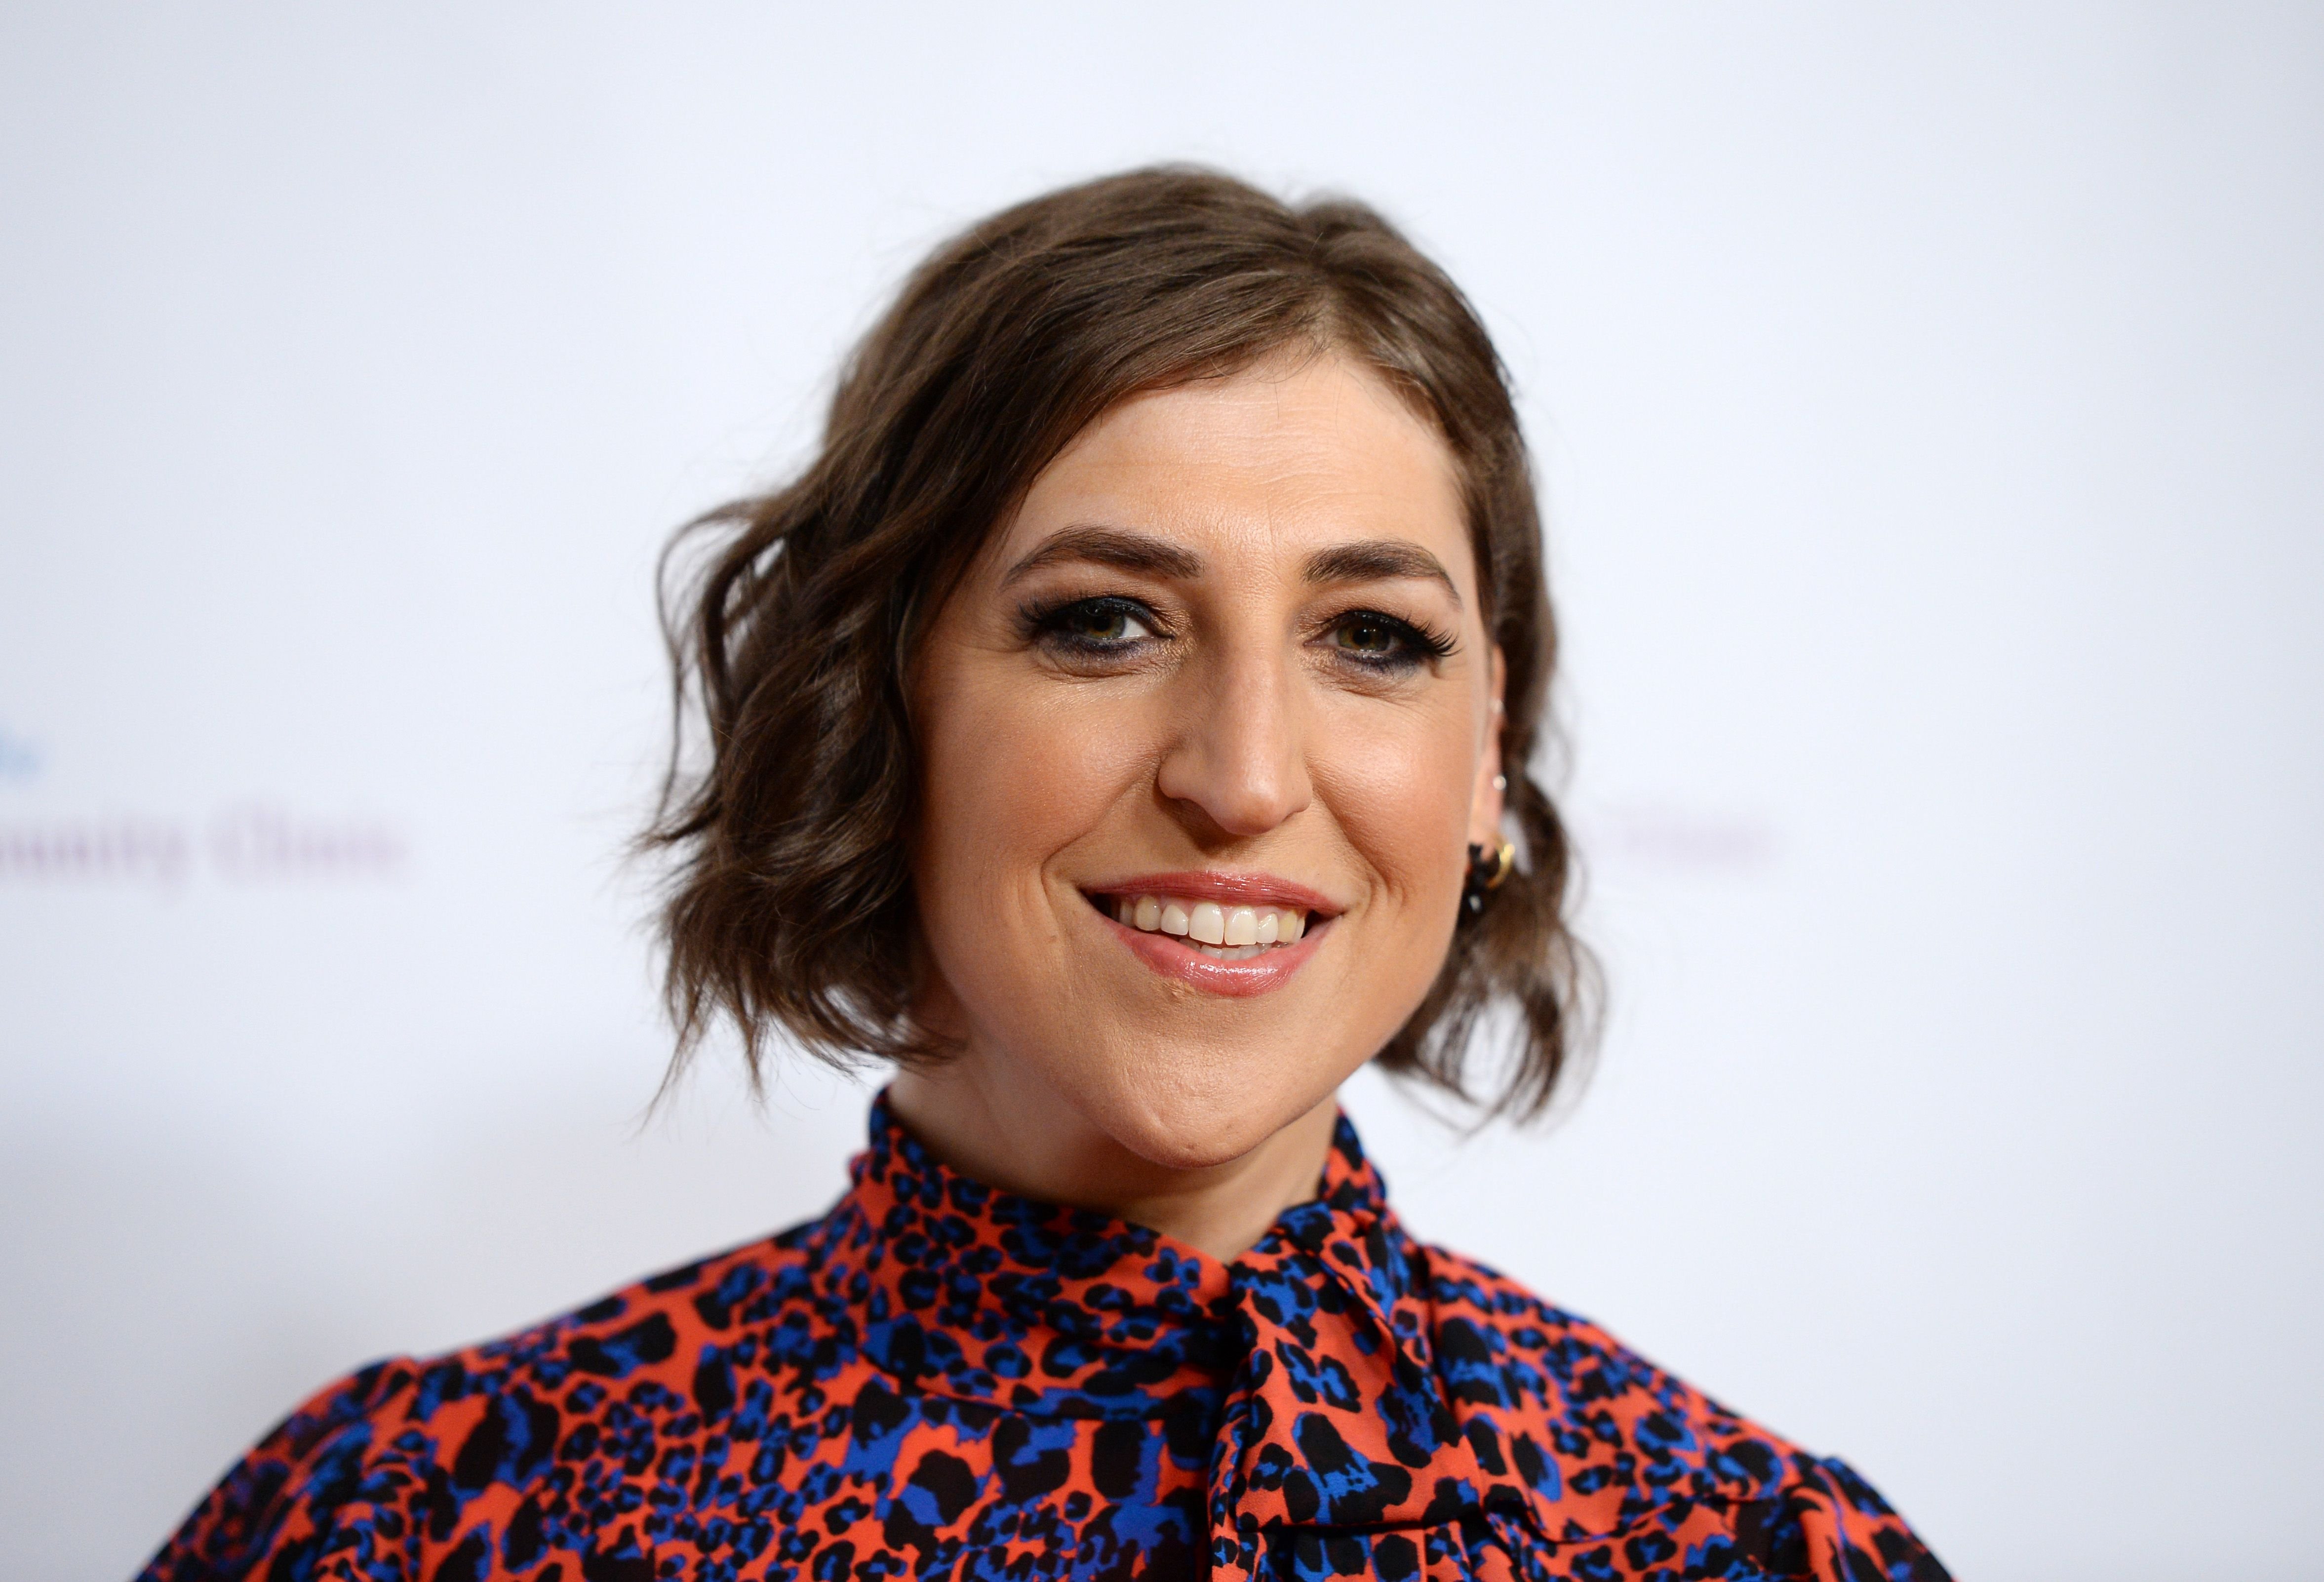 Mayim Bialik at the Saban Community Clinic's 43rd Annual Dinner Gala at The Beverly Hilton Hotel on November 18, 2019 in Beverly Hills, California. | Photo: Getty Images